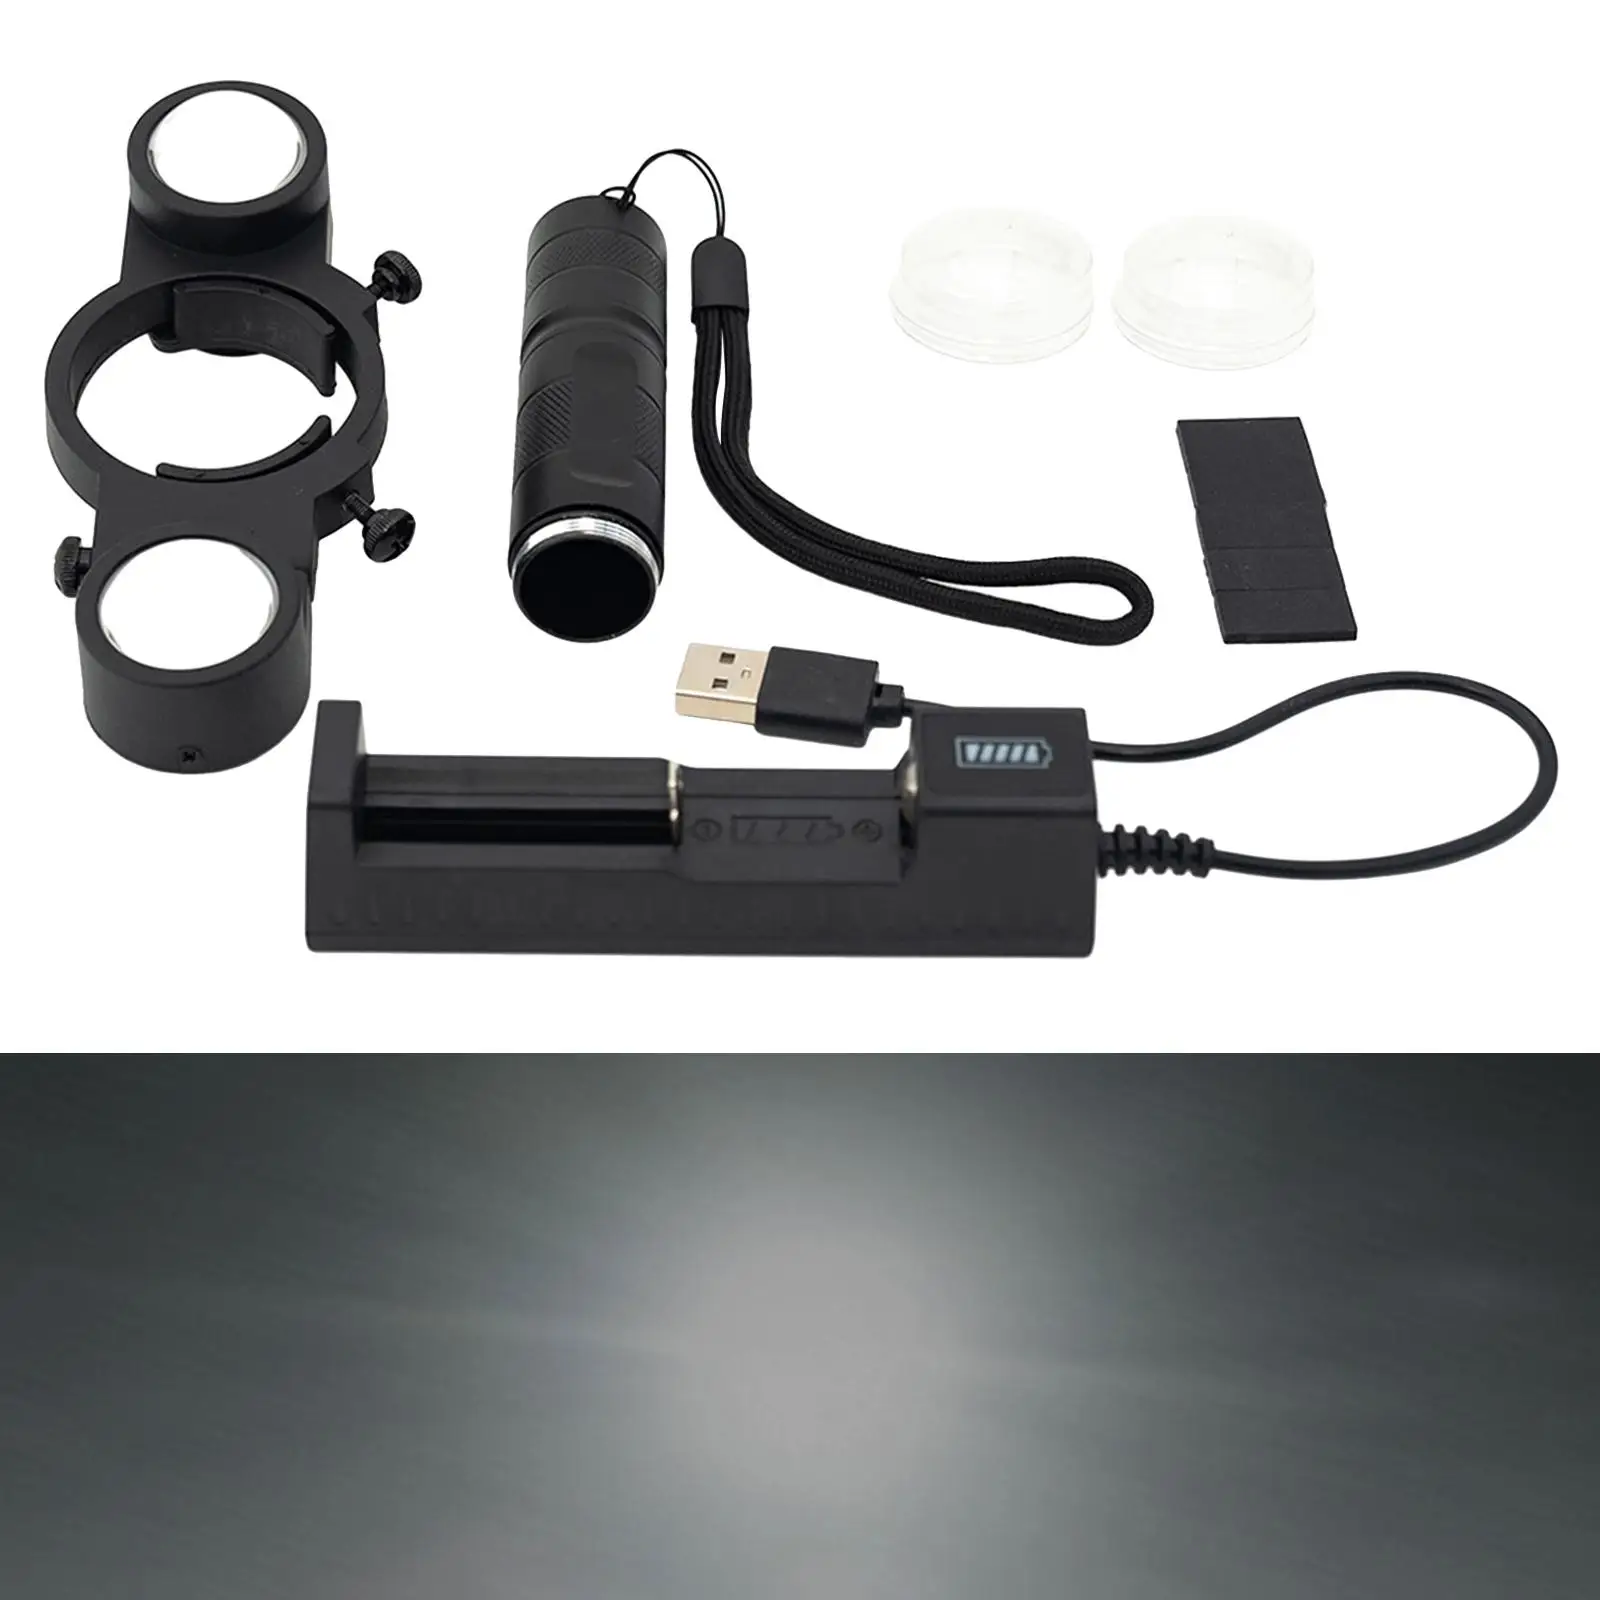 Paint Spray LED Light Indoor Sprayer Light for Home Search Light Painters Spraying Auxiliary Rechargeable Light Filler Lights